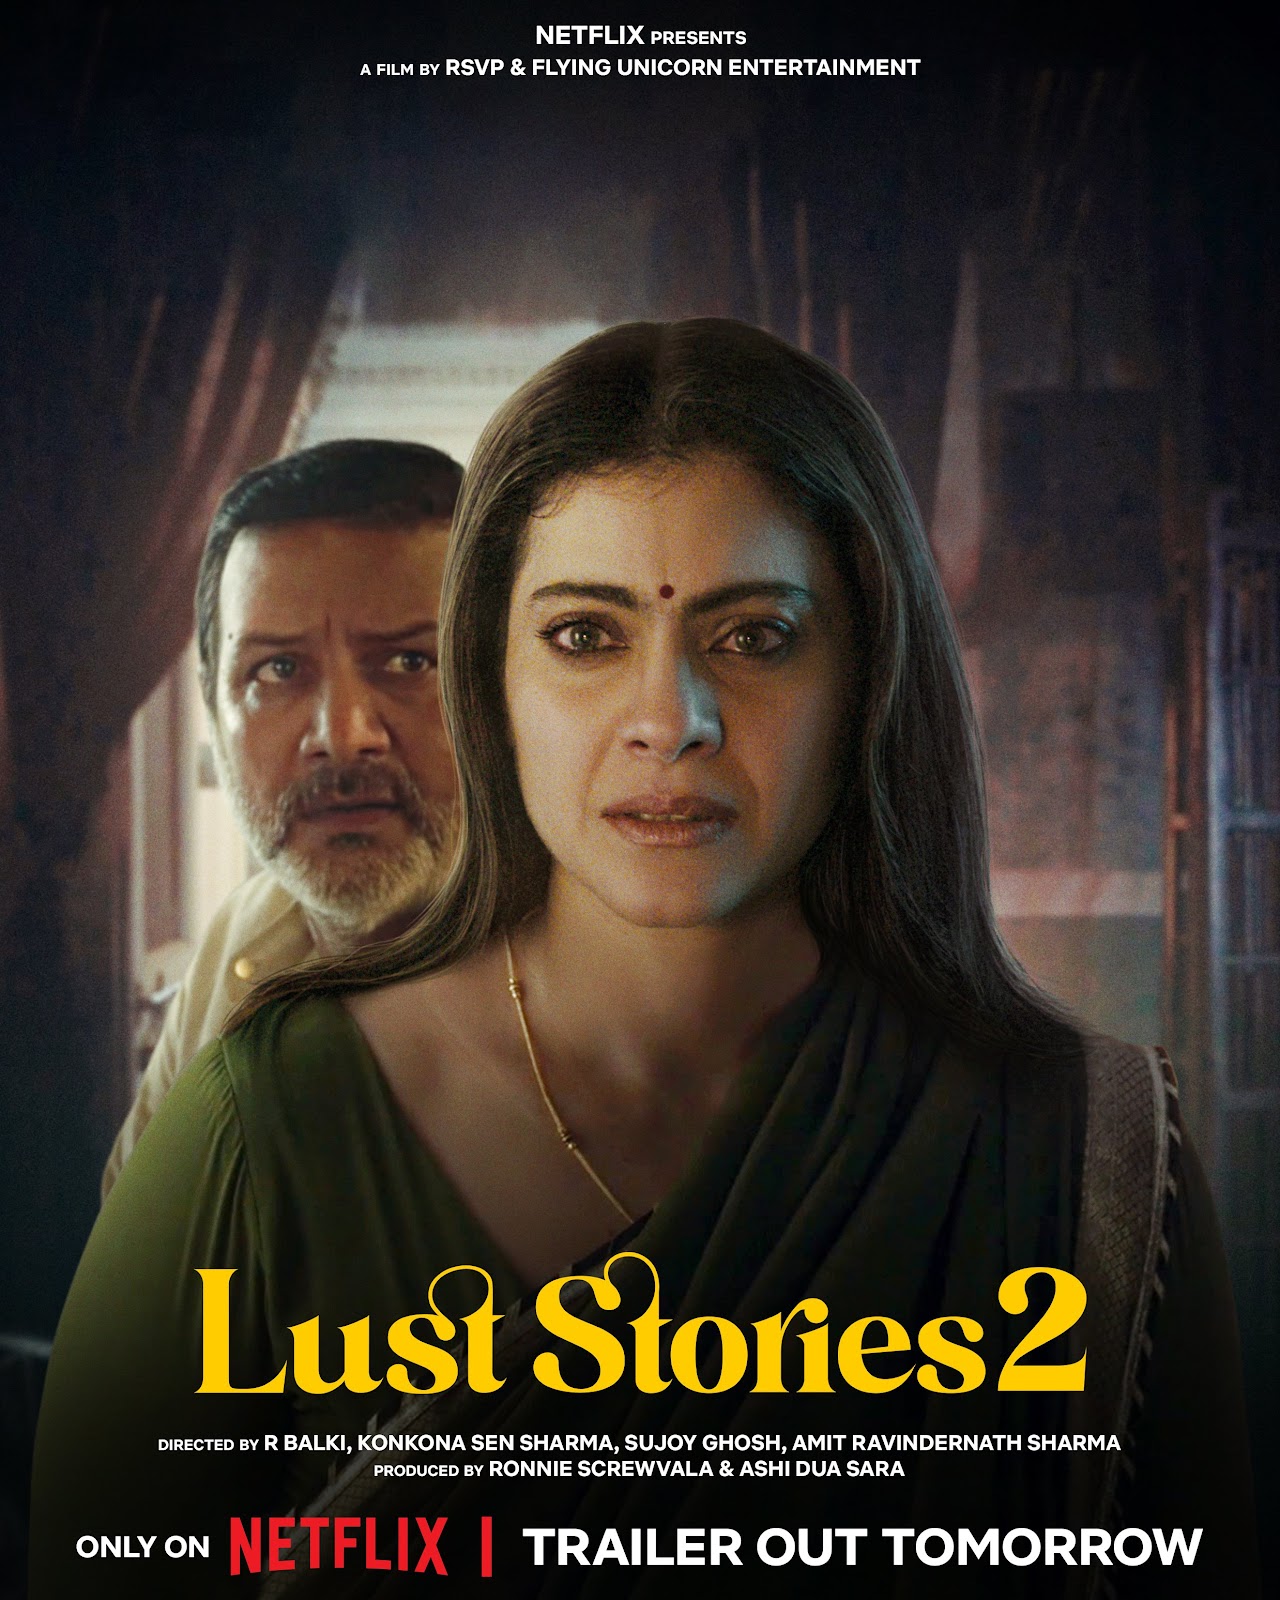 Lust Stories 2 Web Series on OTT platform  Netflix - Here is the  Netflix Lust Stories 2 wiki, Full Star-Cast and crew, Release Date, Promos, story, Character.